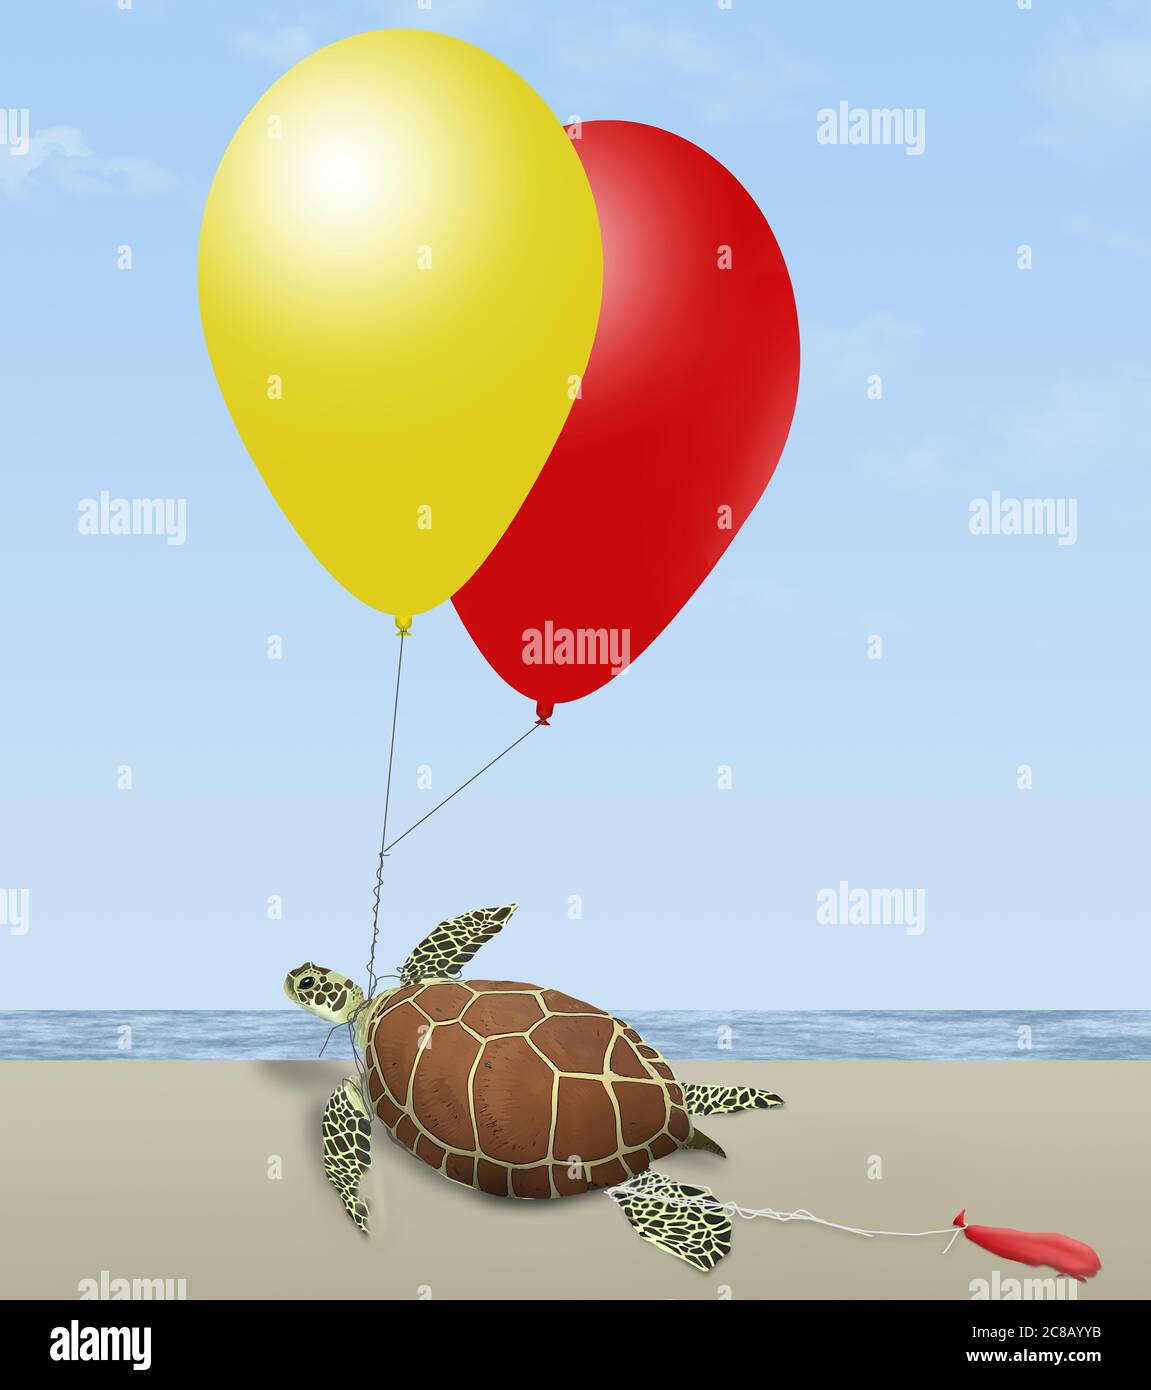 A green sea turtle on a beach by the ocean is seen tangled in helium party balloons probably released miles from the ocean. This is a 3-D illustration Stock Photo